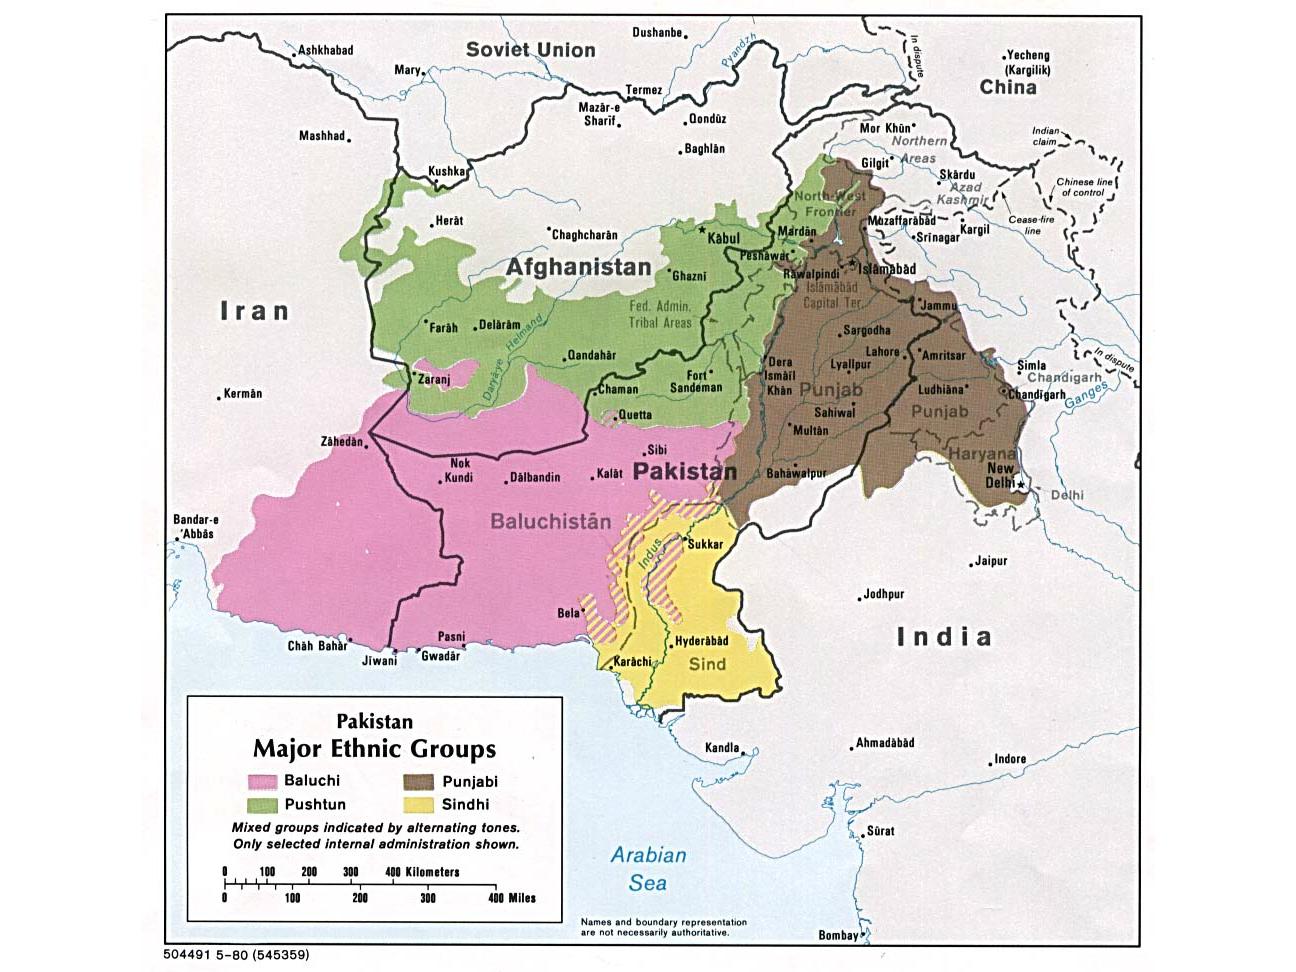 Enlarged view: The four major ethnic groups of Pakistan in 1980, courtesy of University of Texas at Austin/Wikimedia Commons